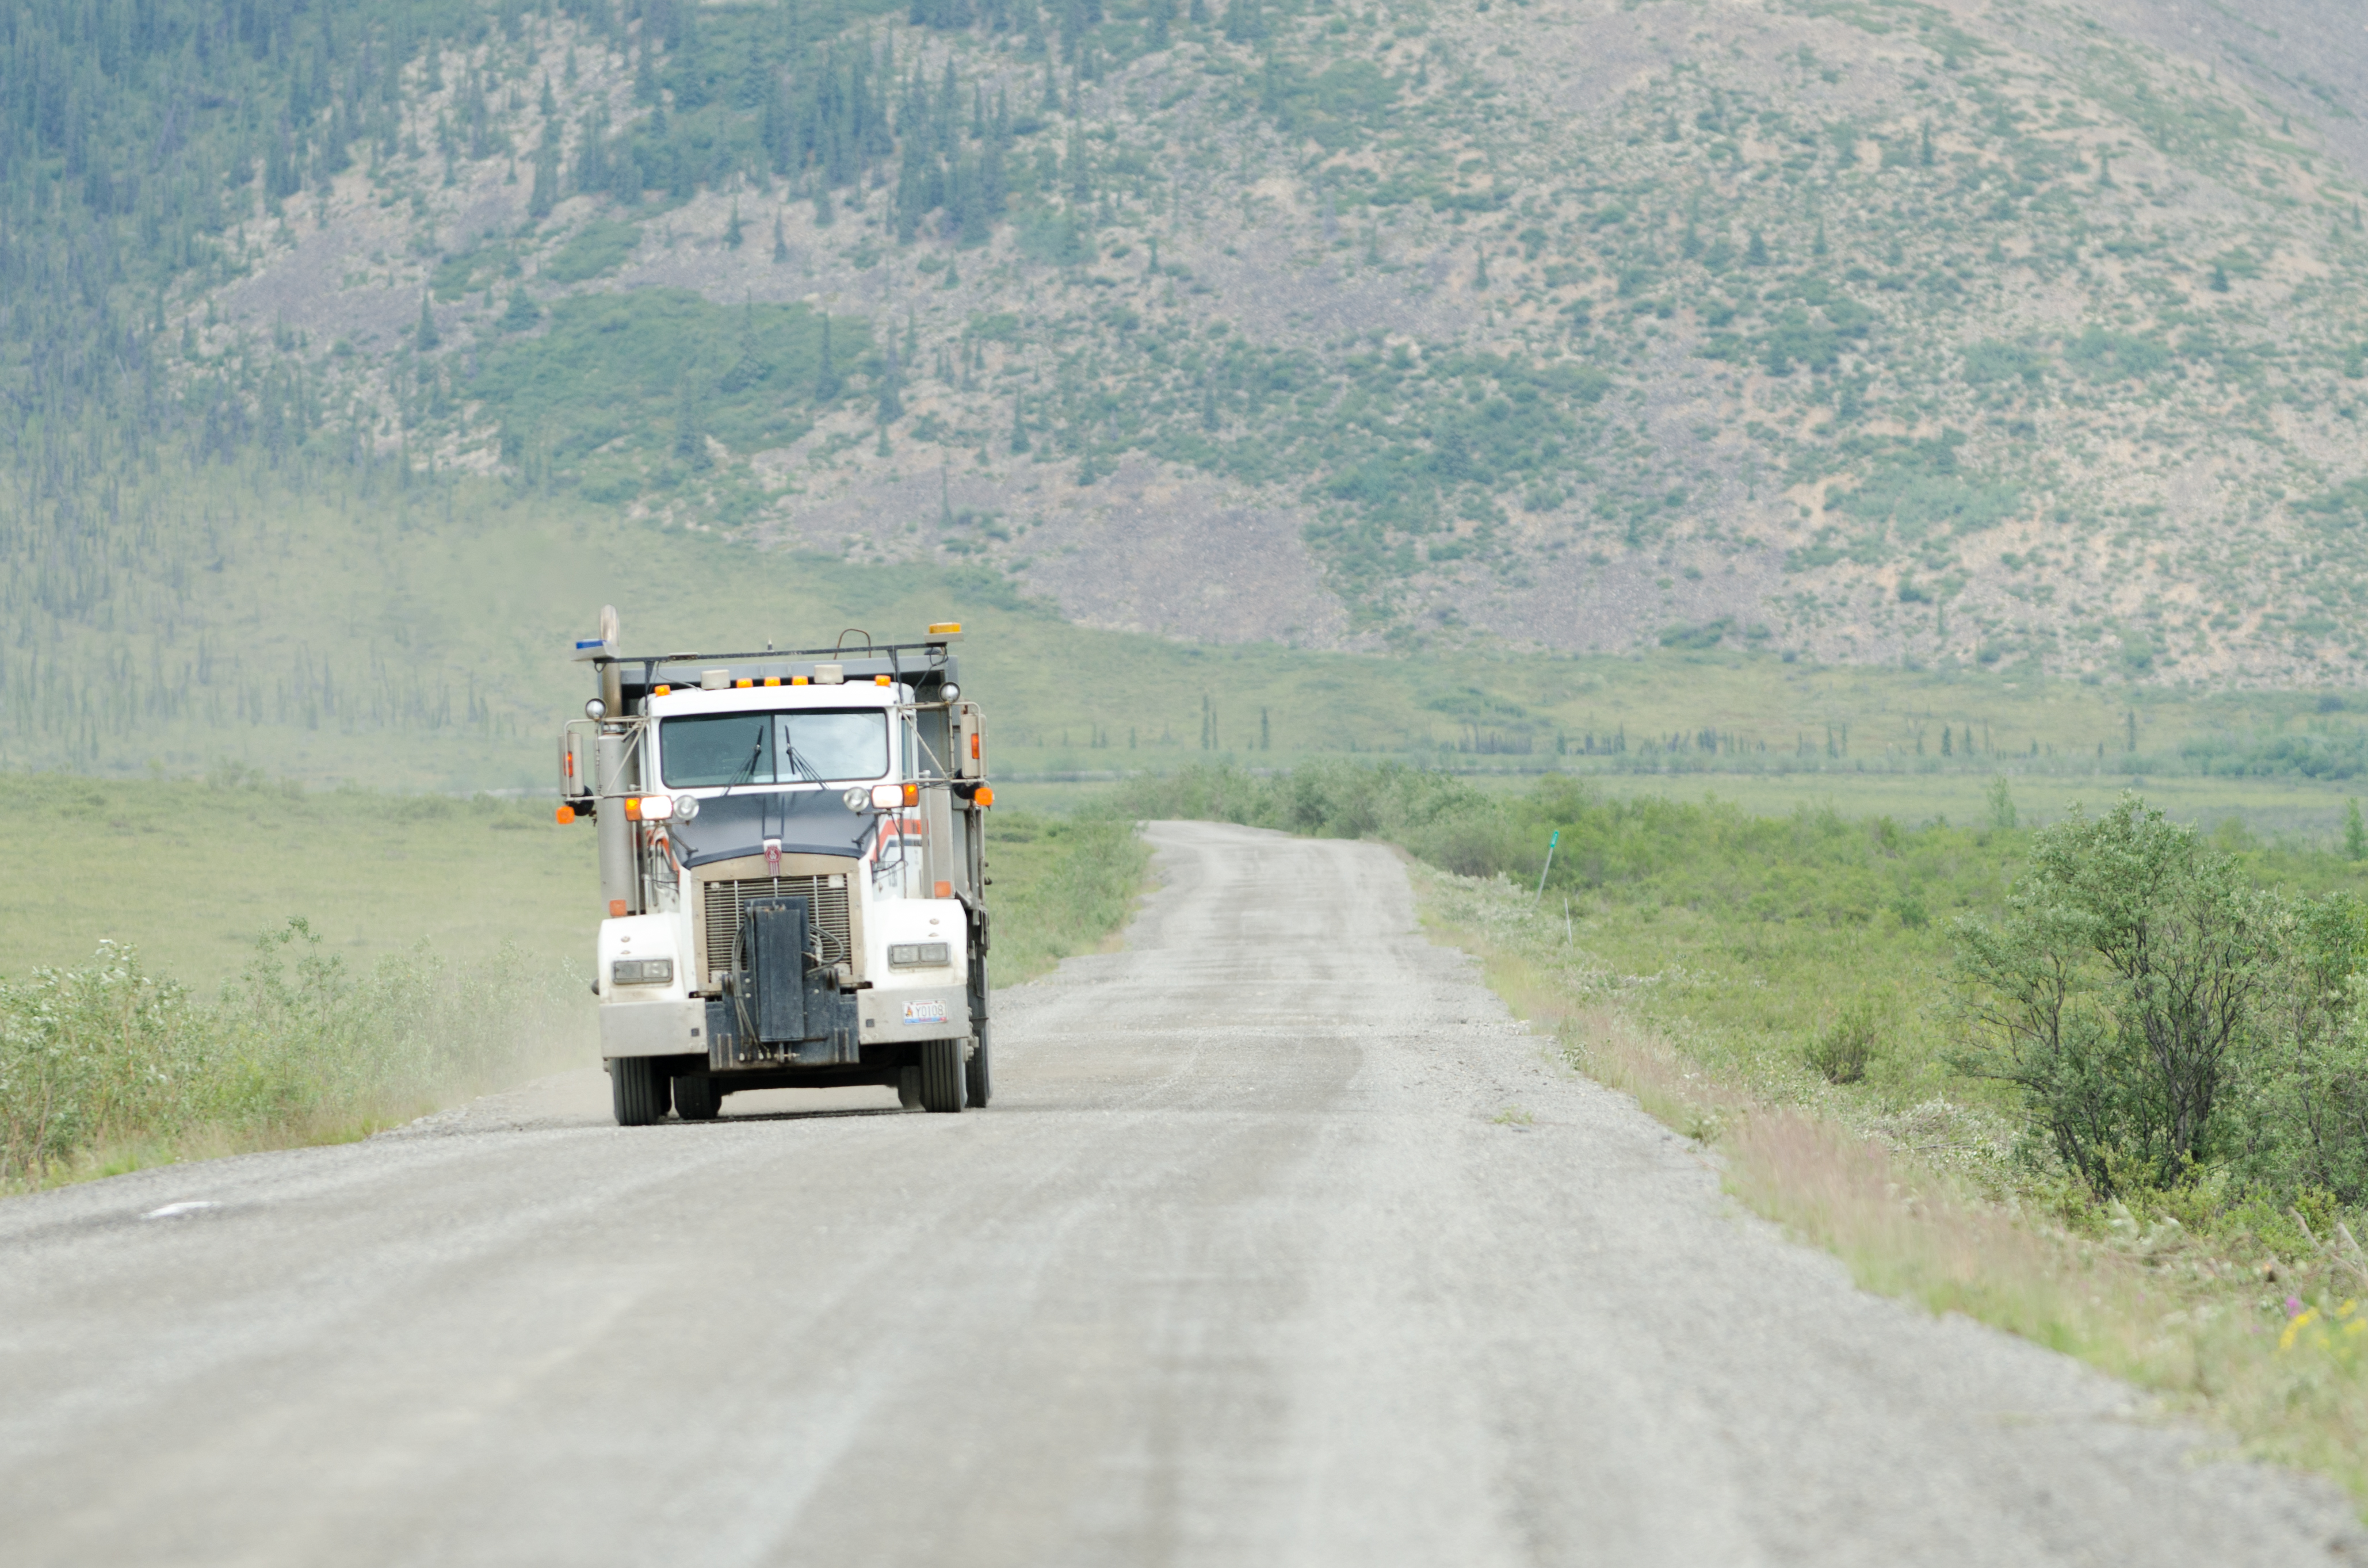 The Dempster Highway has a gravel surface.